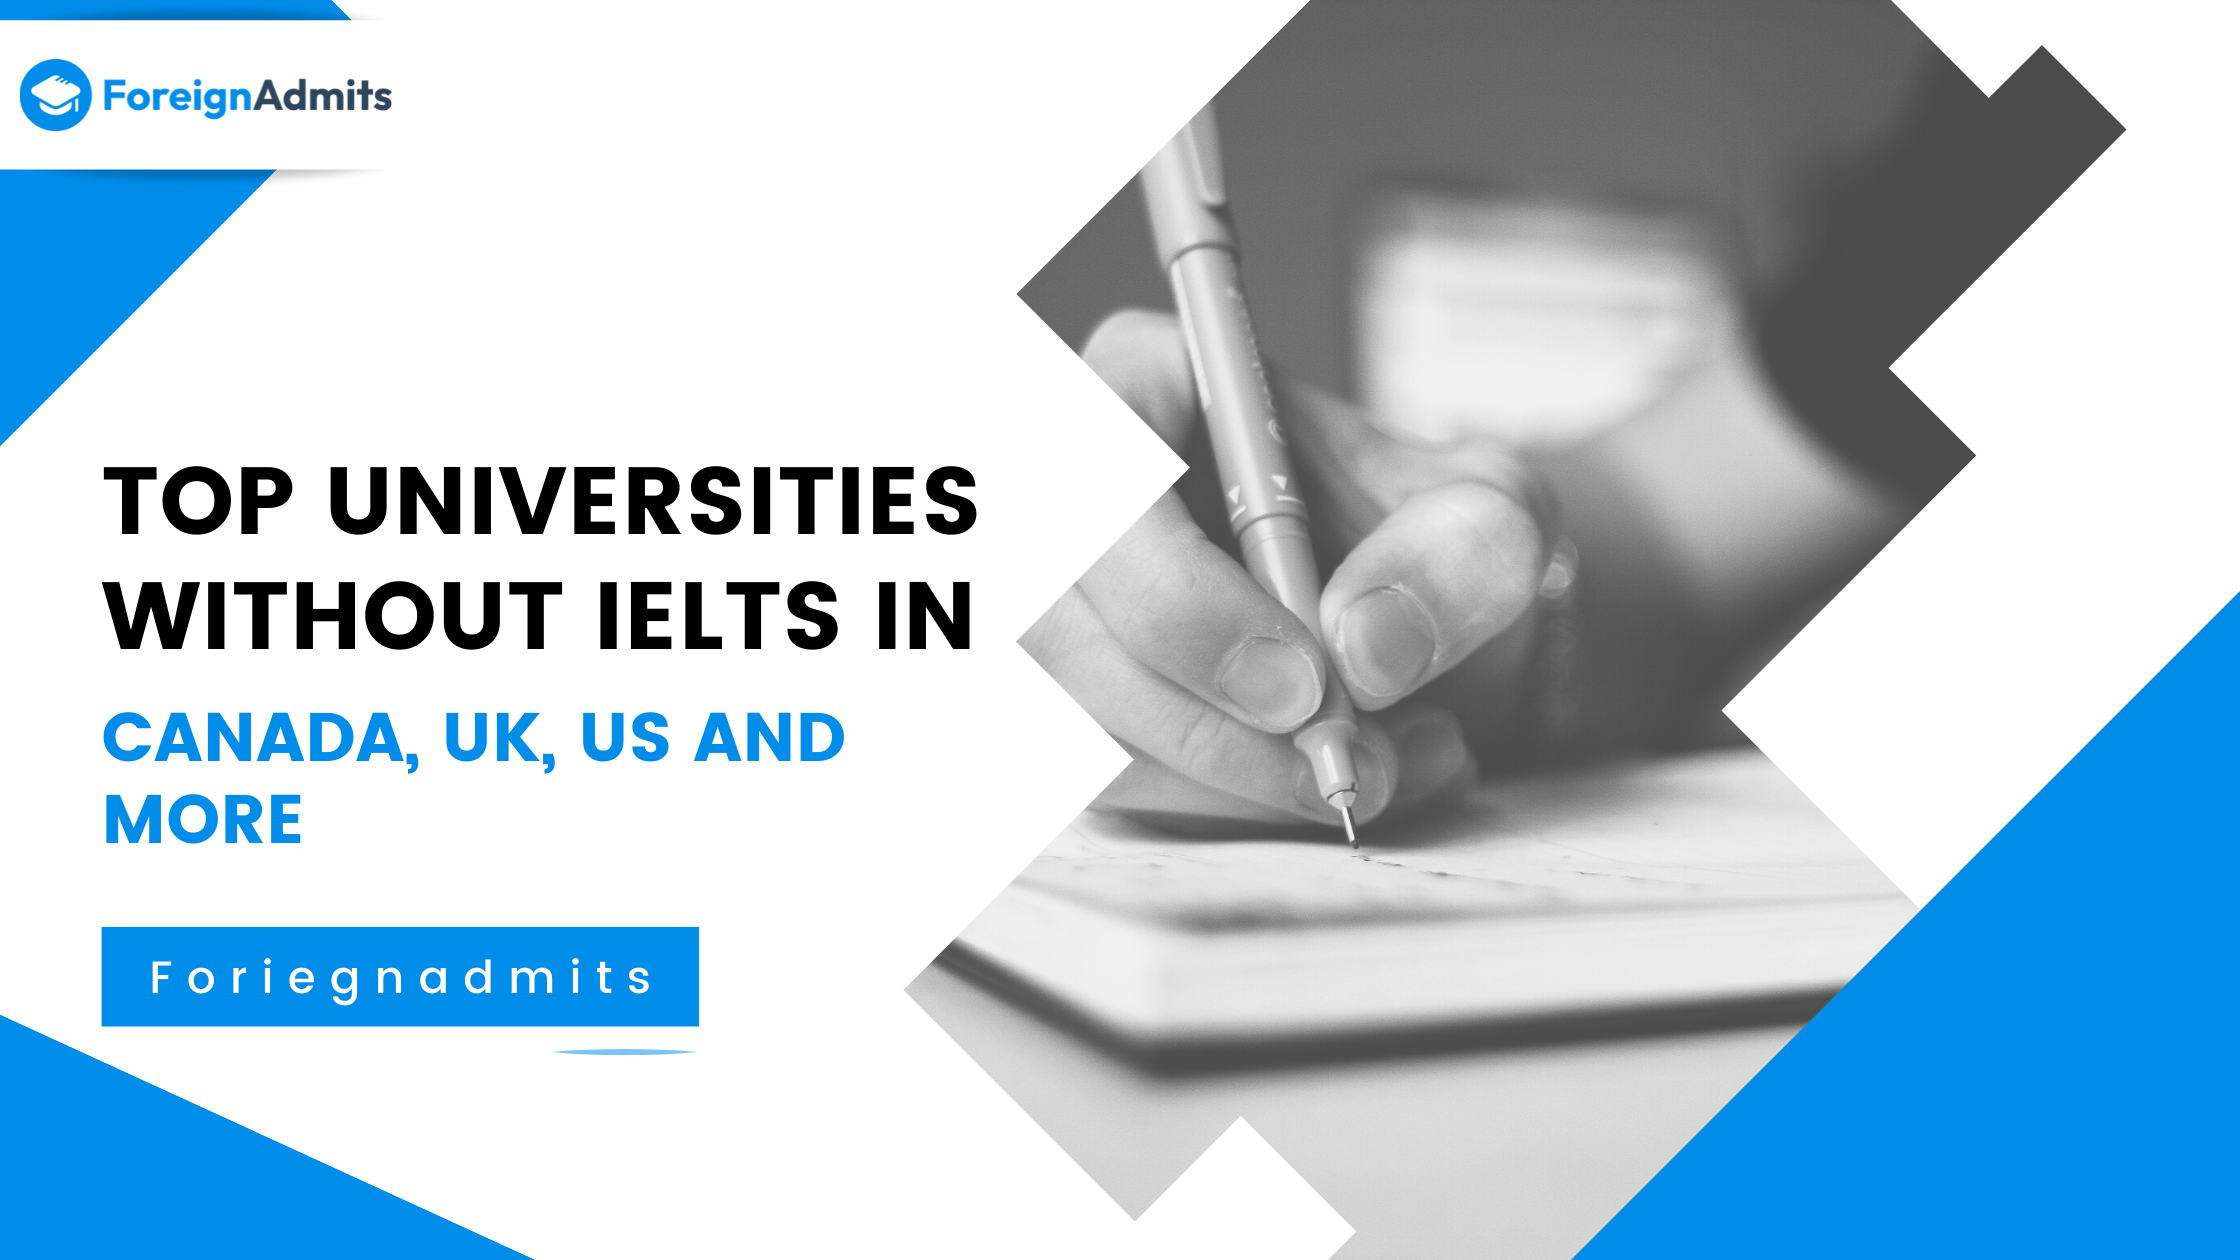 Top Universities without IELTS in Canada, UK, US and more